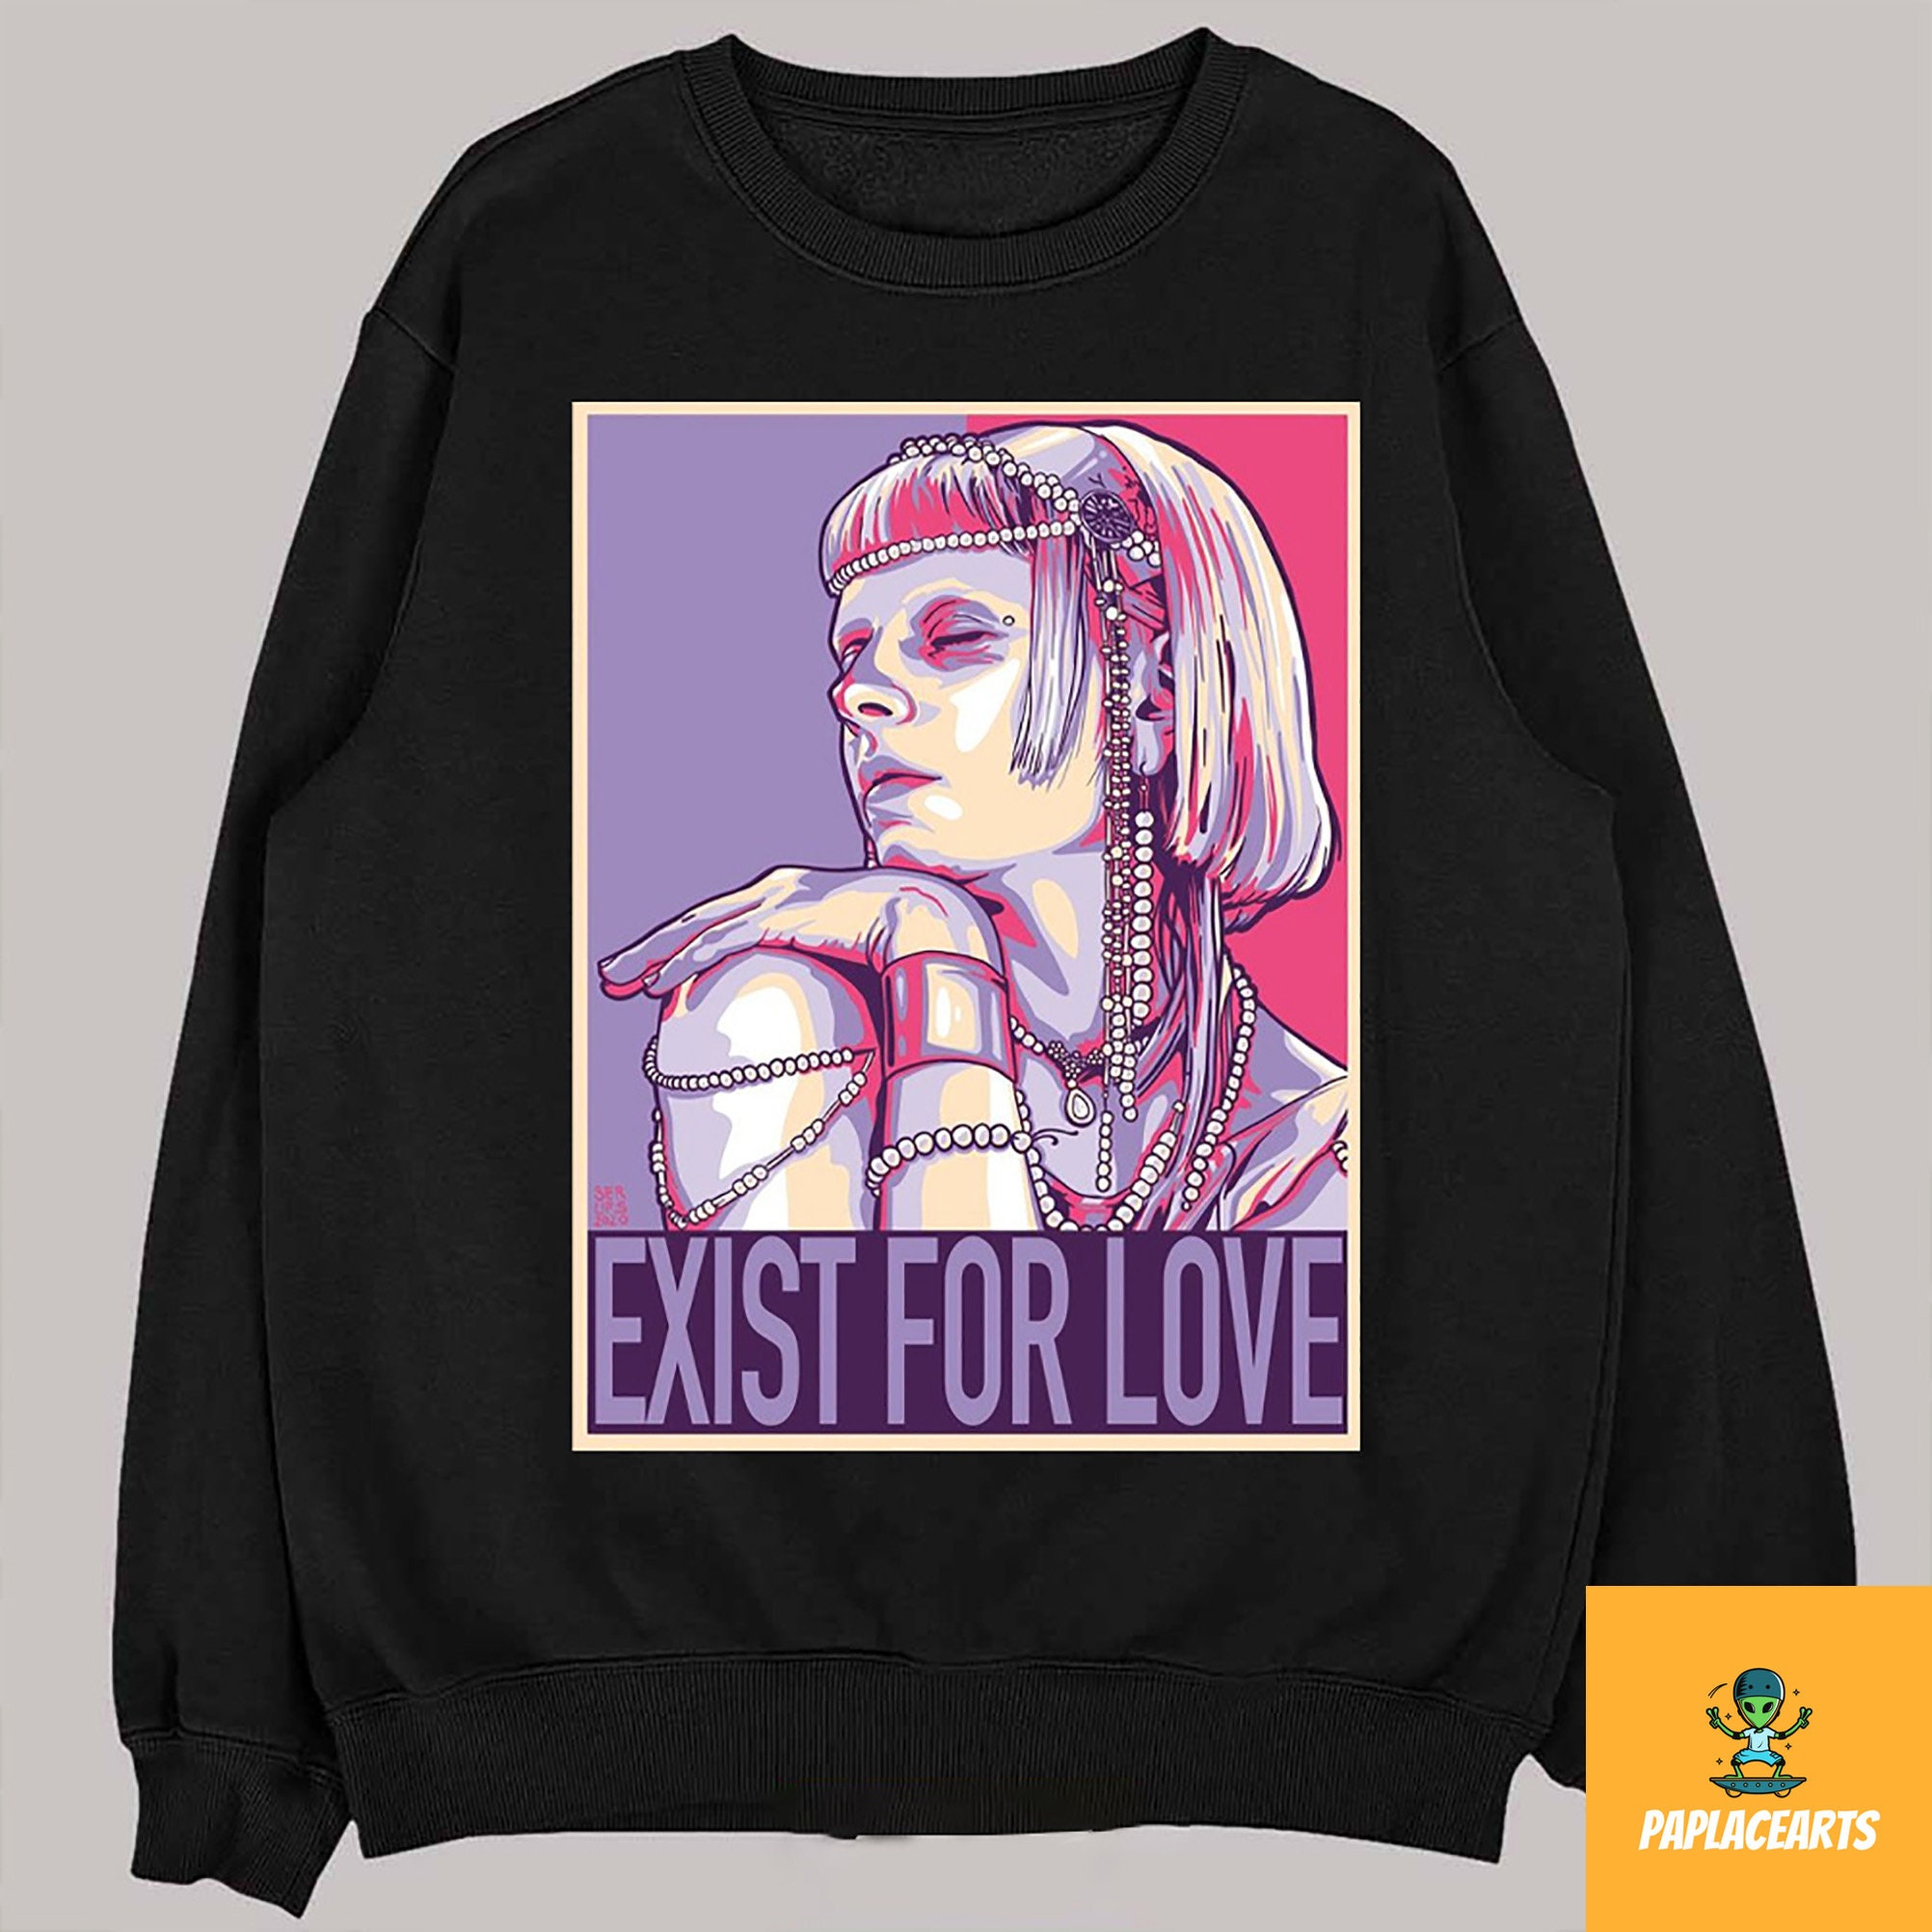 Exist for Love Graphic T-shirt Aurora Singer Shirt Exist for - Etsy ...